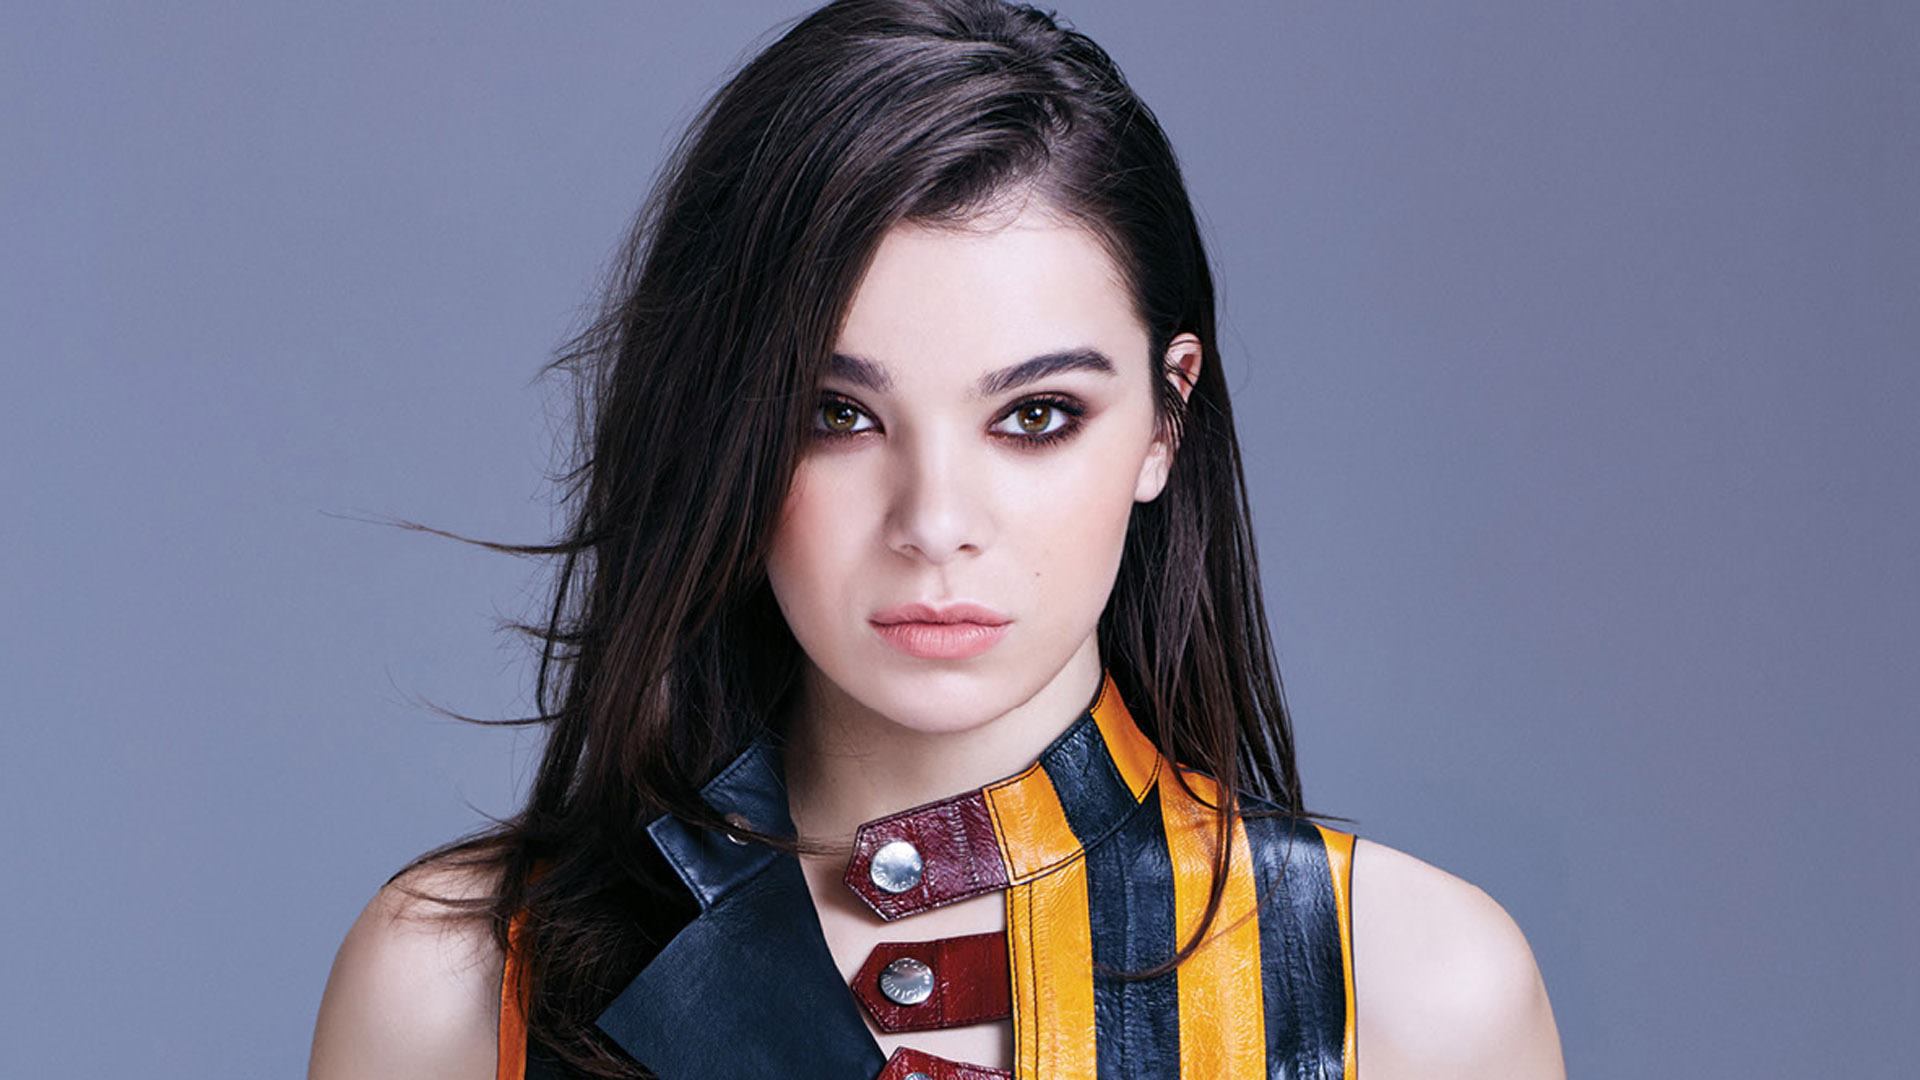 Hailee Steinfeld Wallpaper Image Photos Pictures Background